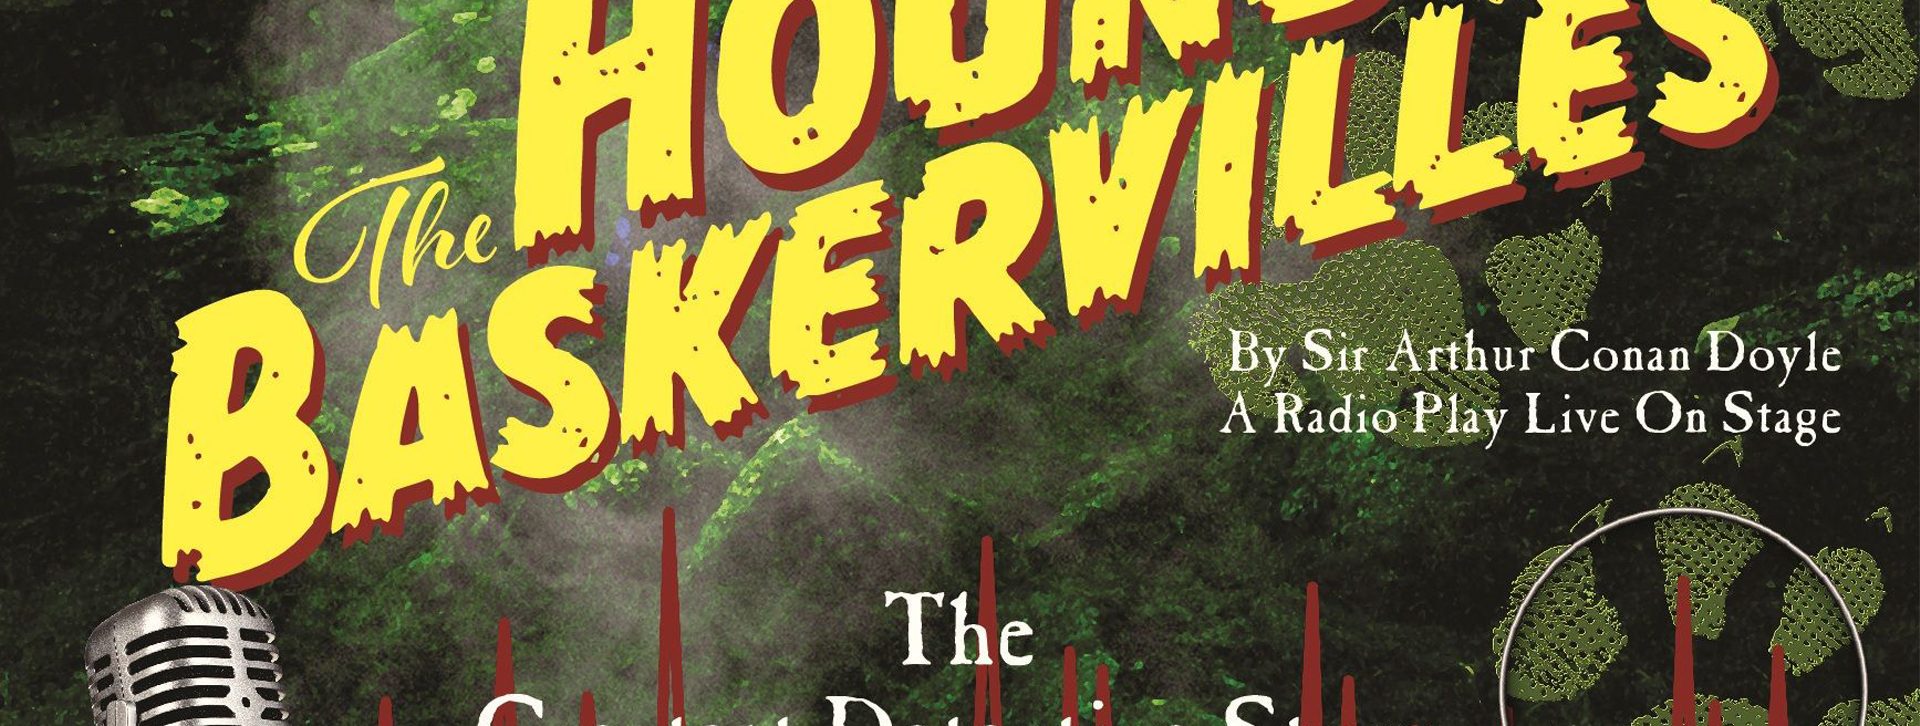 The Hound of the Baskervilles a radio play live on stage